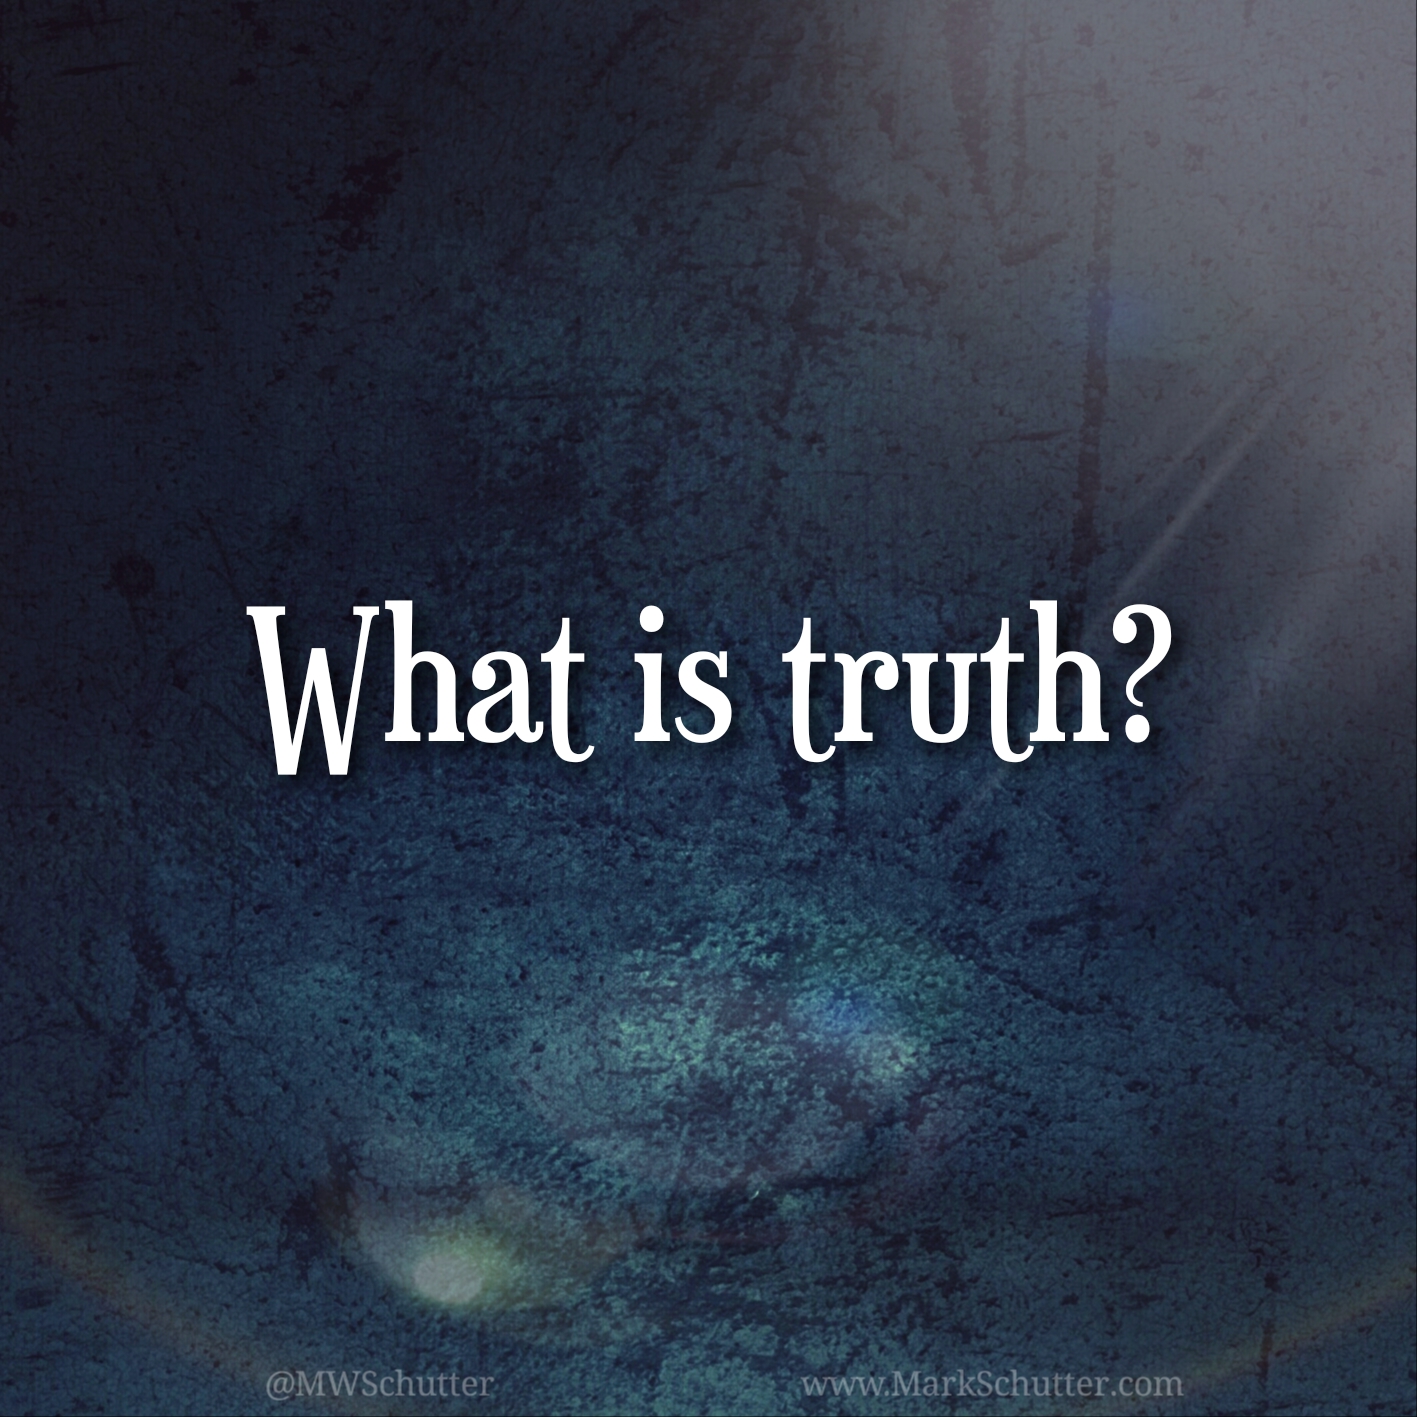 A Conversation – What is truth?